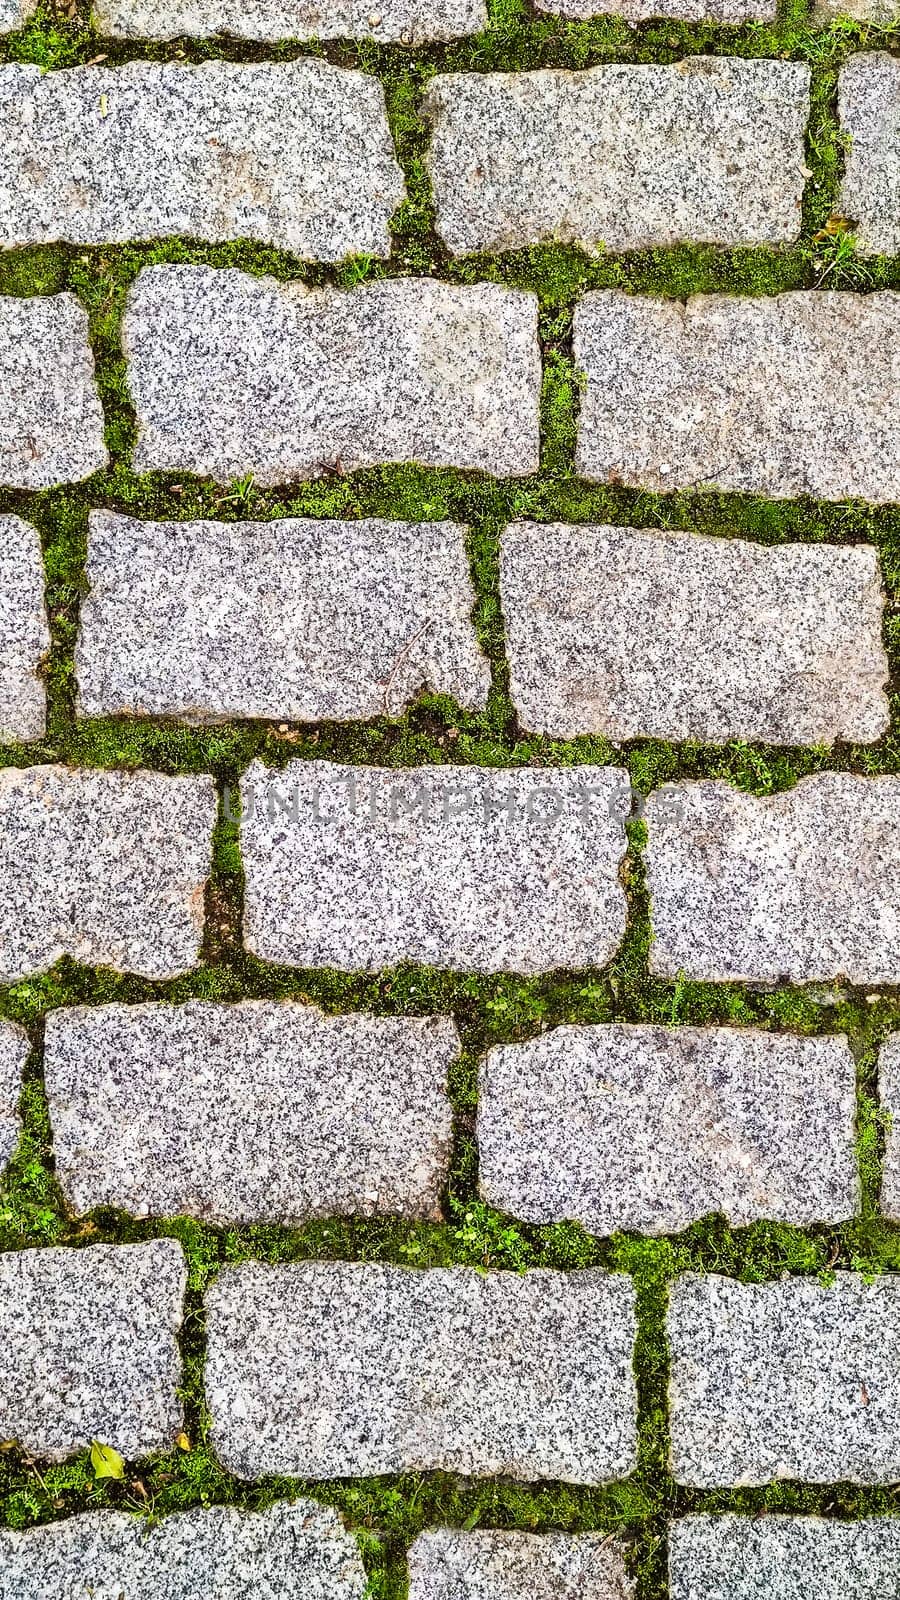 Green grass sprouted between bricks of cobblestone path, top view. Concept of harmonious fusion of city and nature